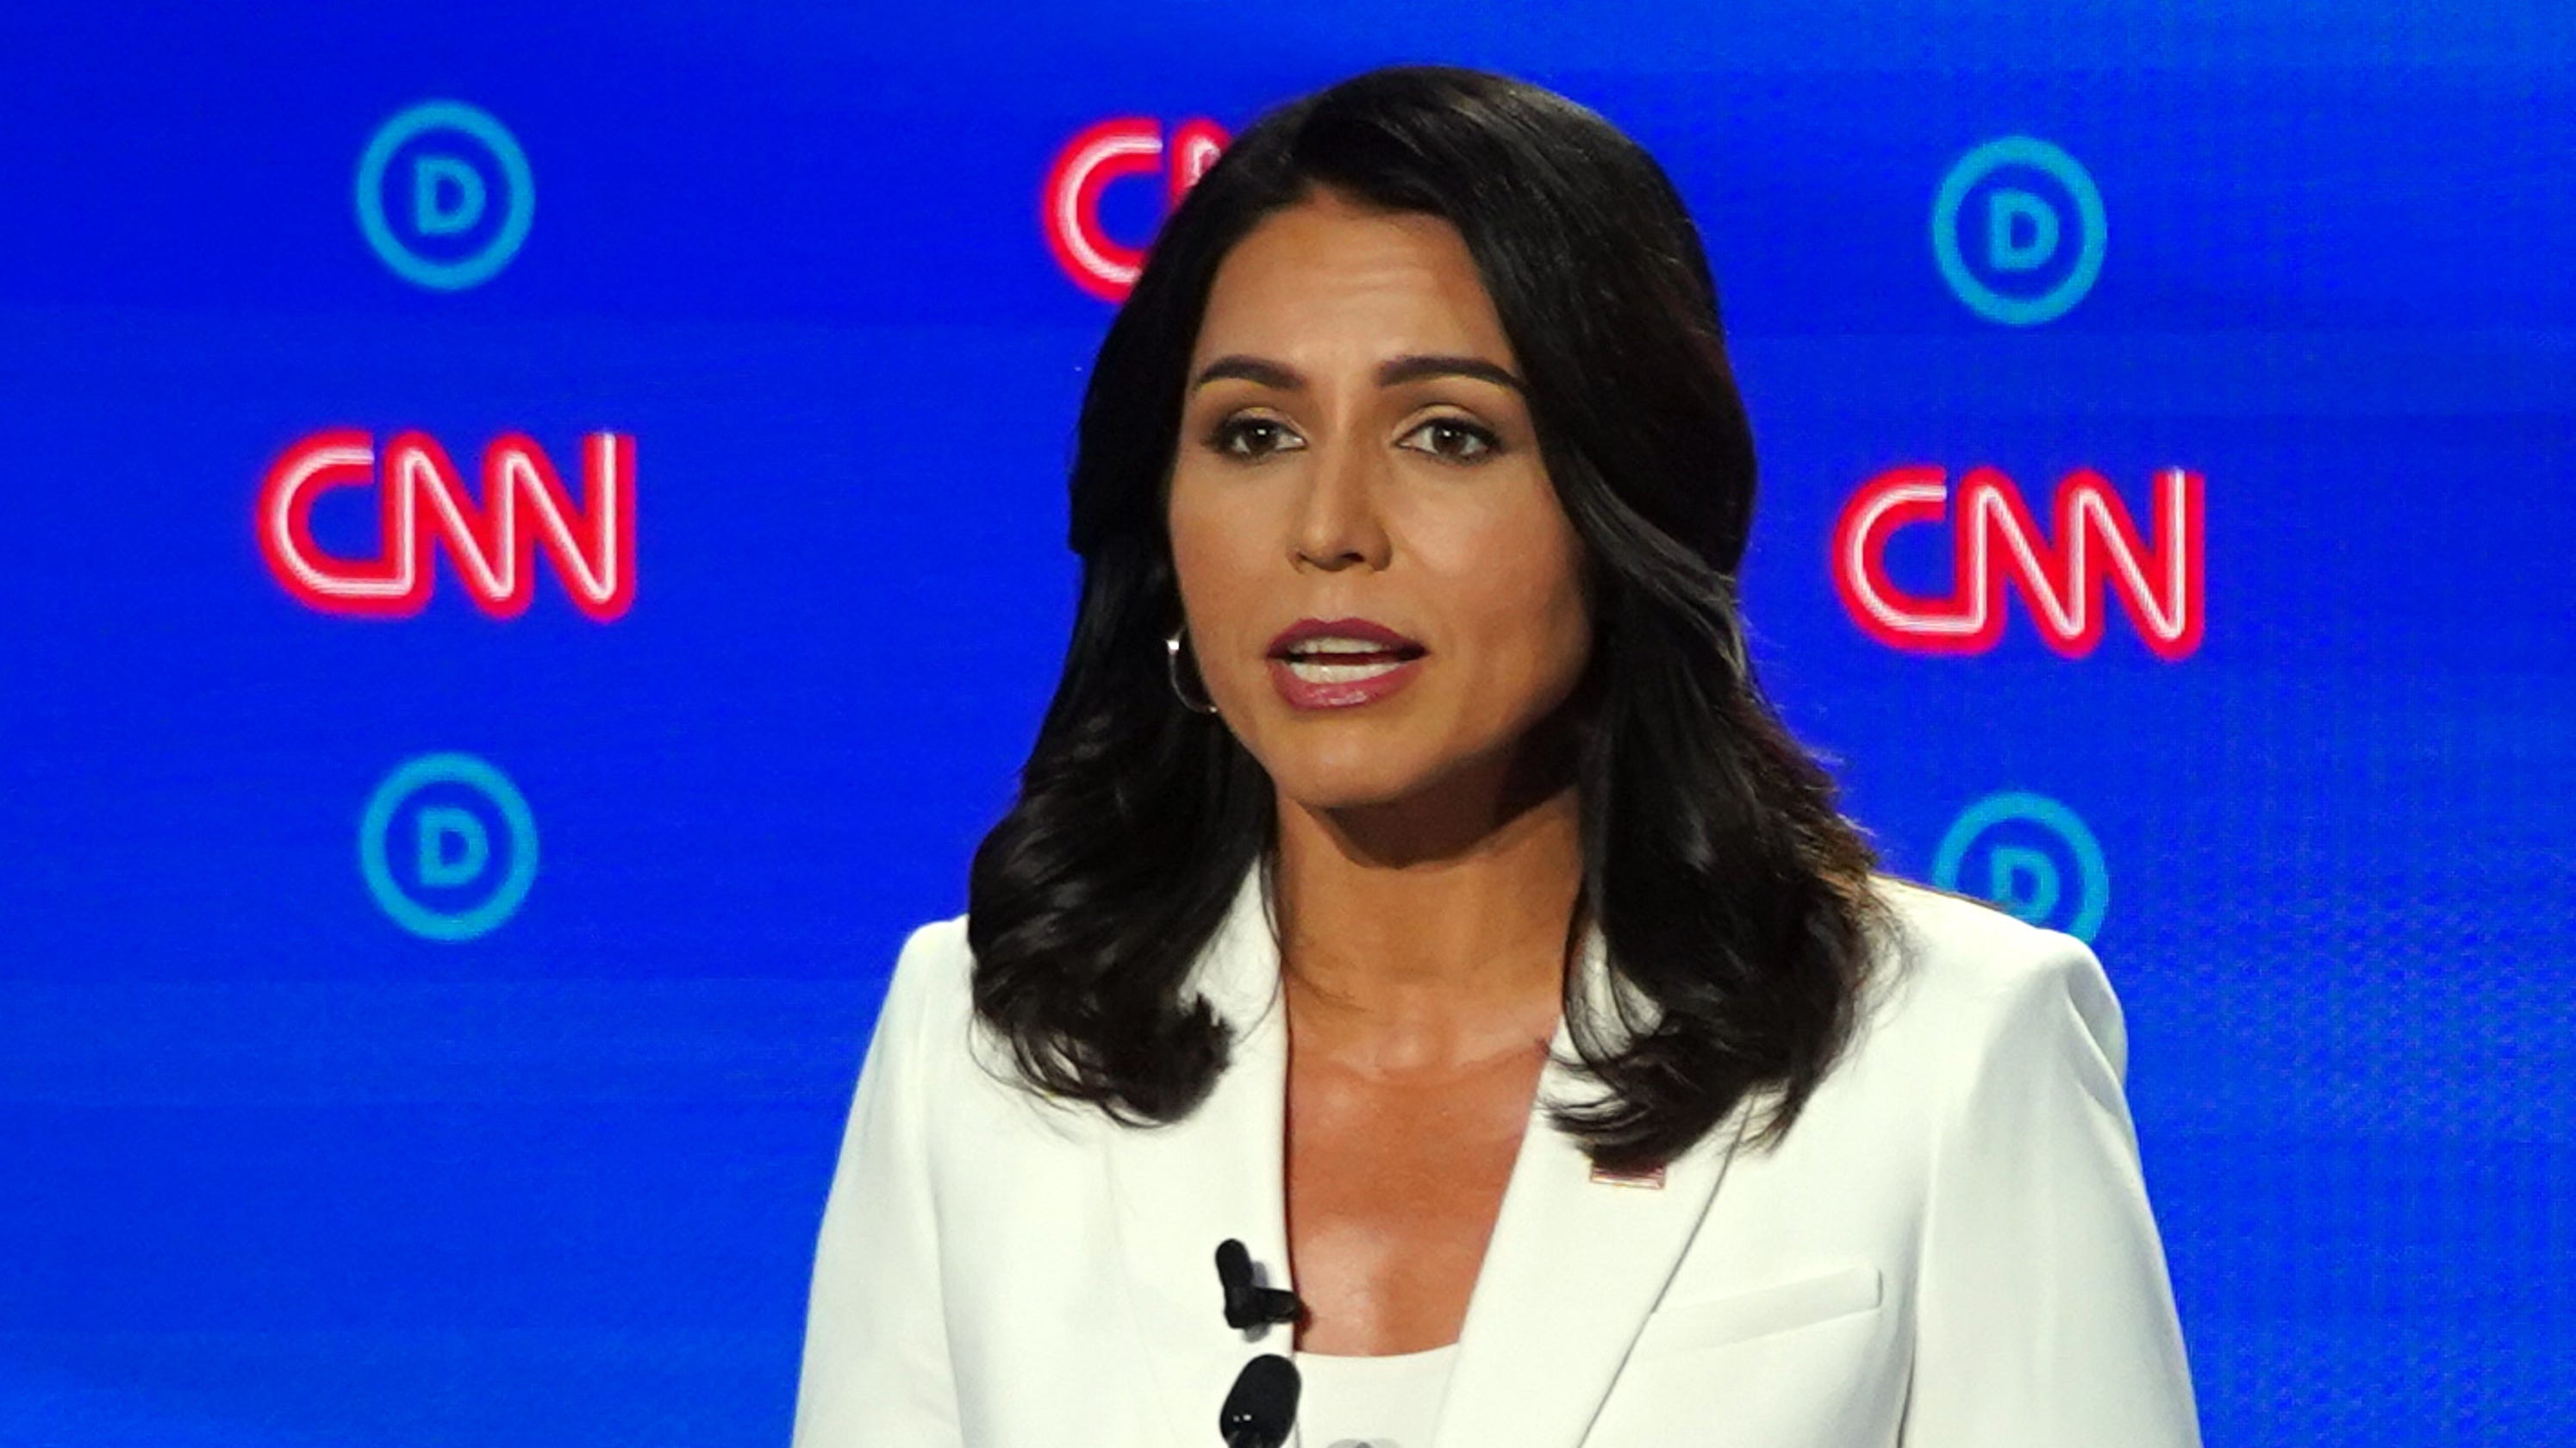 Democratic Debate: Tulsi Gabbard is once again most searched candidate2989 x 1680